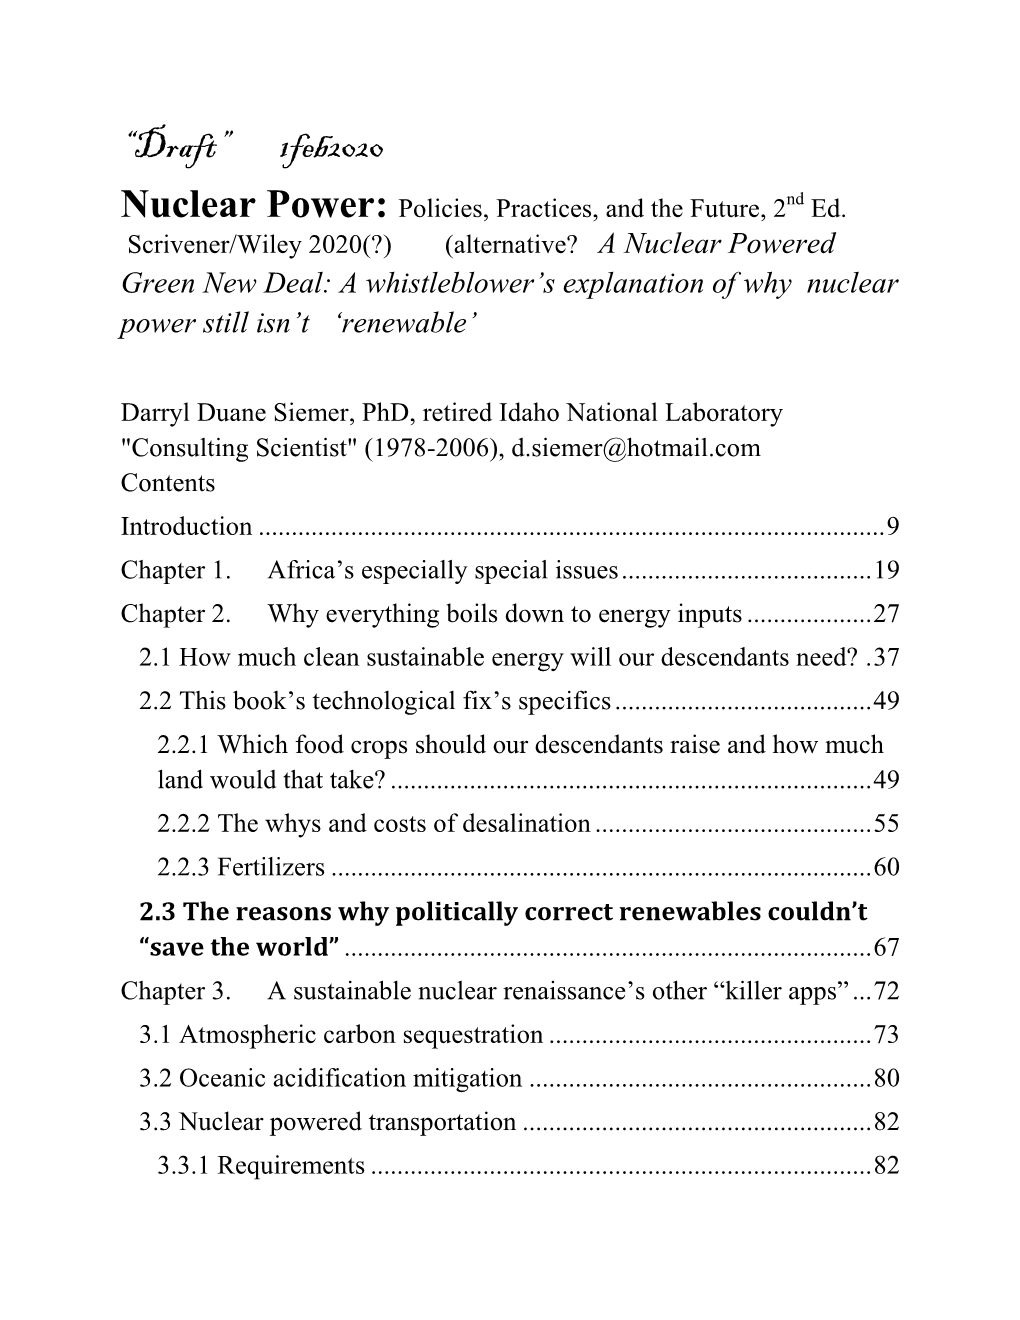 “Draft” 1Feb2020 Nuclear Power: Policies, Practices, and the Future, 2Nd Ed